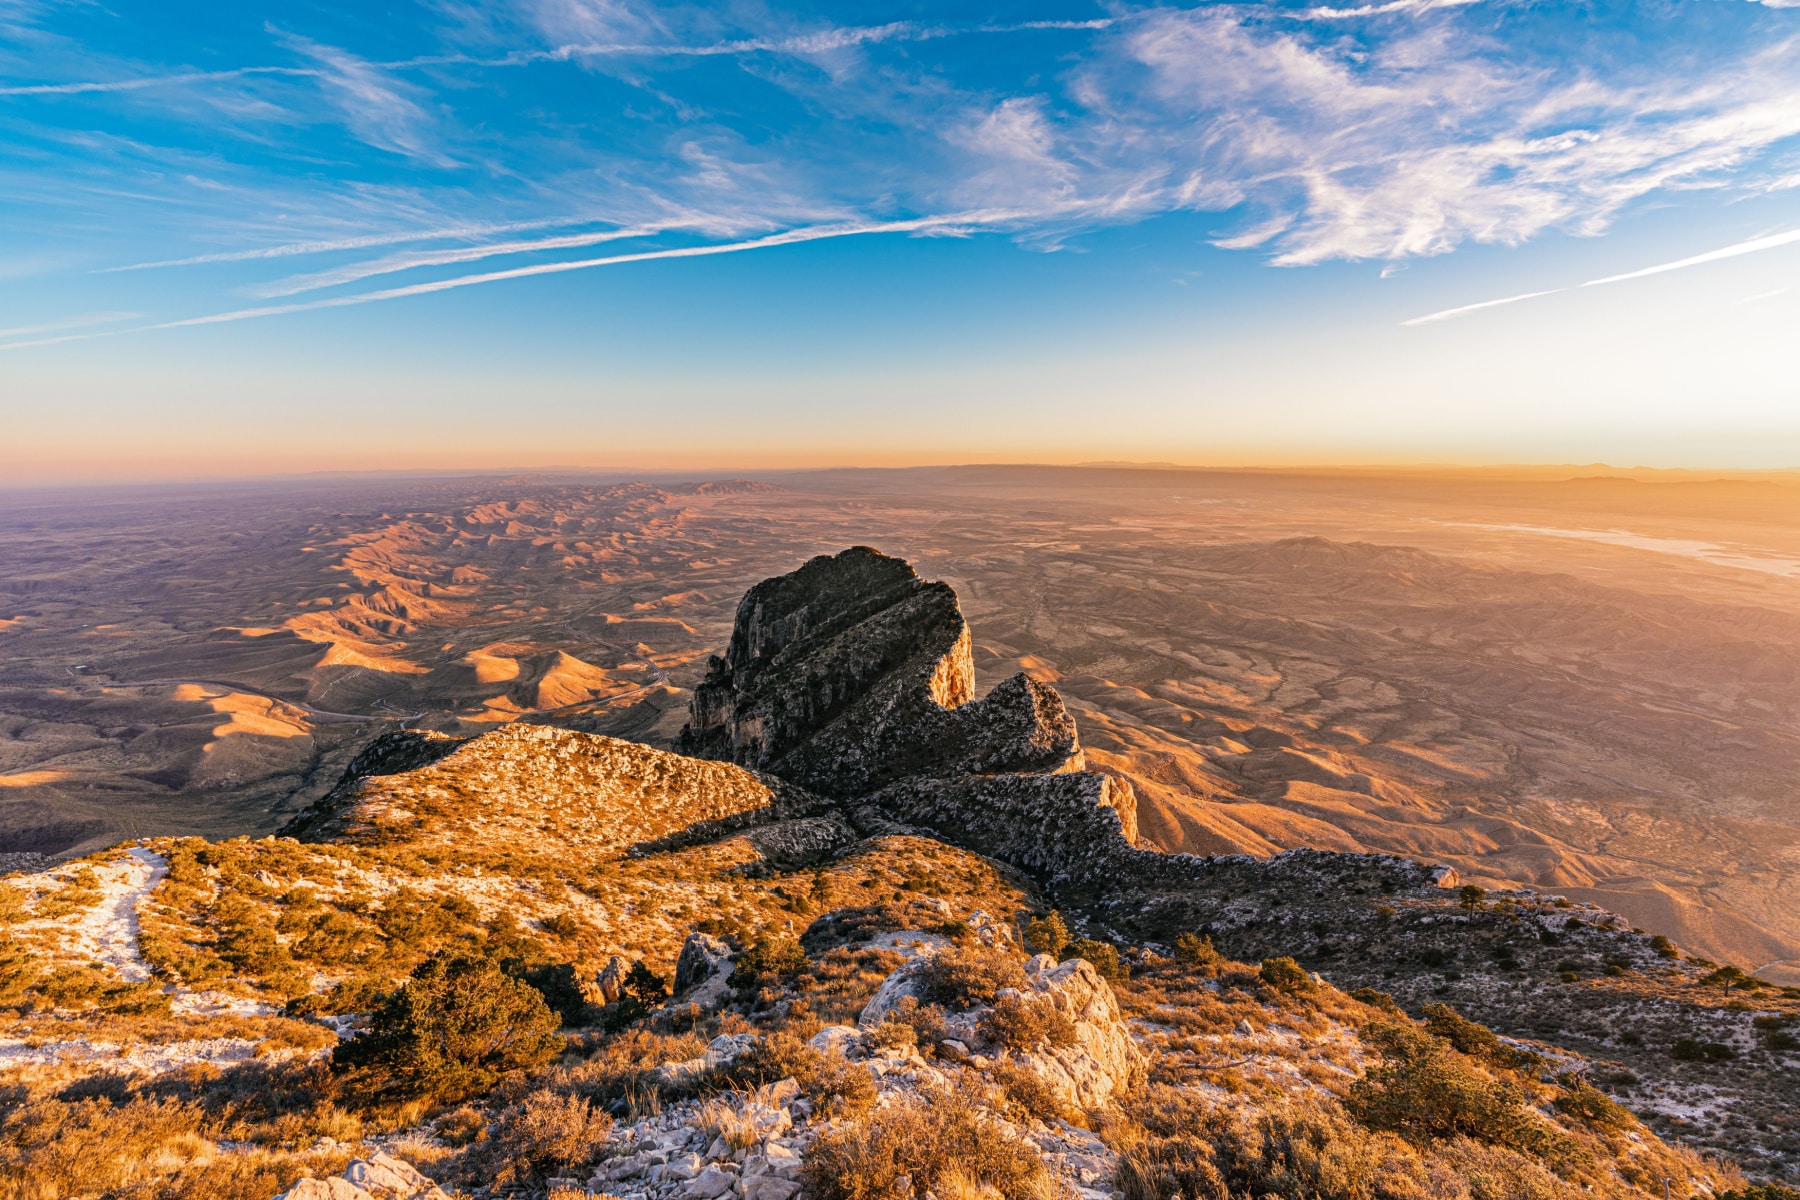 One of the best hikes in Guadalupe Mountains National Park offers a view of El Capitan and the surrounding wilderness as mountains and grasslands spread in the distance.